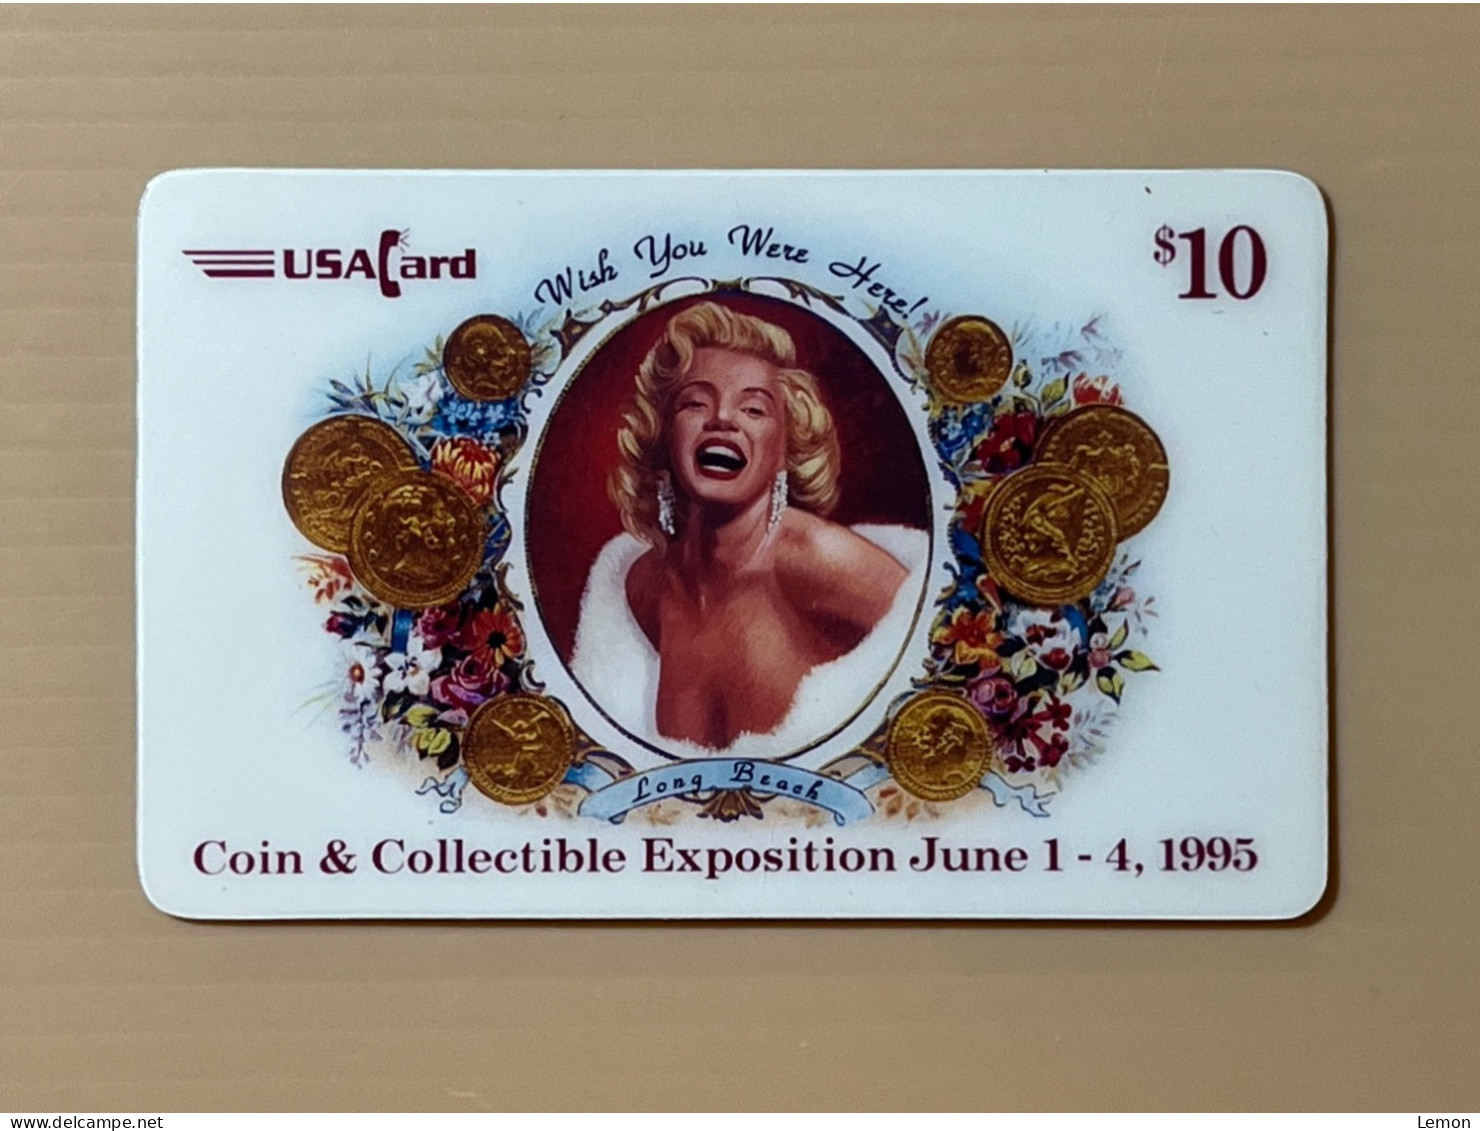 Mint USA UNITED STATES America Prepaid Telecard Phonecard, Coin & Collectible Expo 1995, Set Of 1 Mint Card With Folder - Colecciones